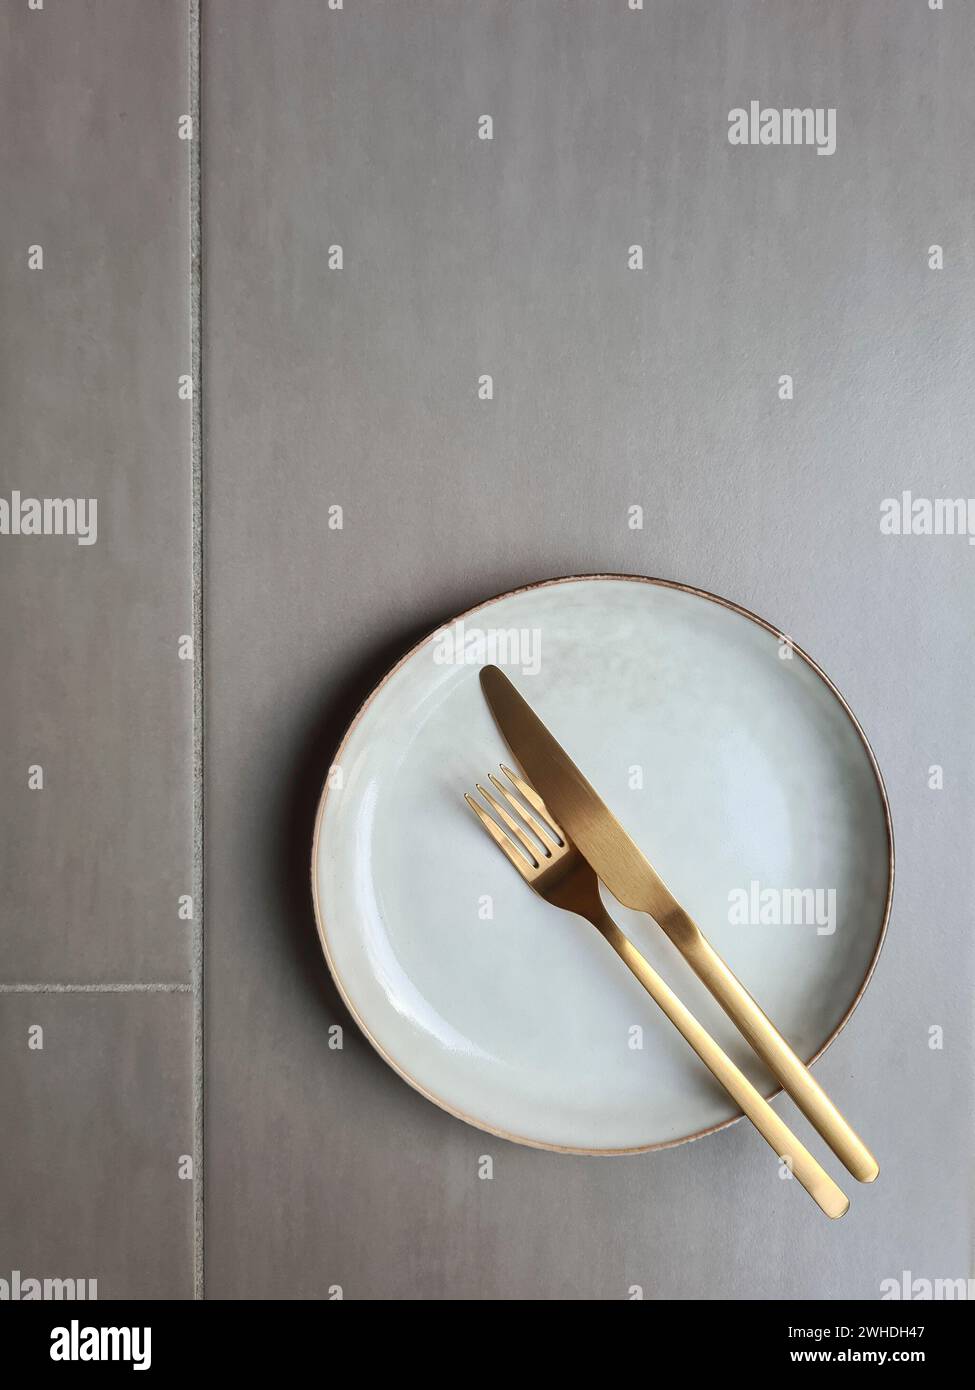 Natural-colored ceramic plate with brown rim and gold-colored knife with fork on a grey background, plate with cutlery Stock Photo